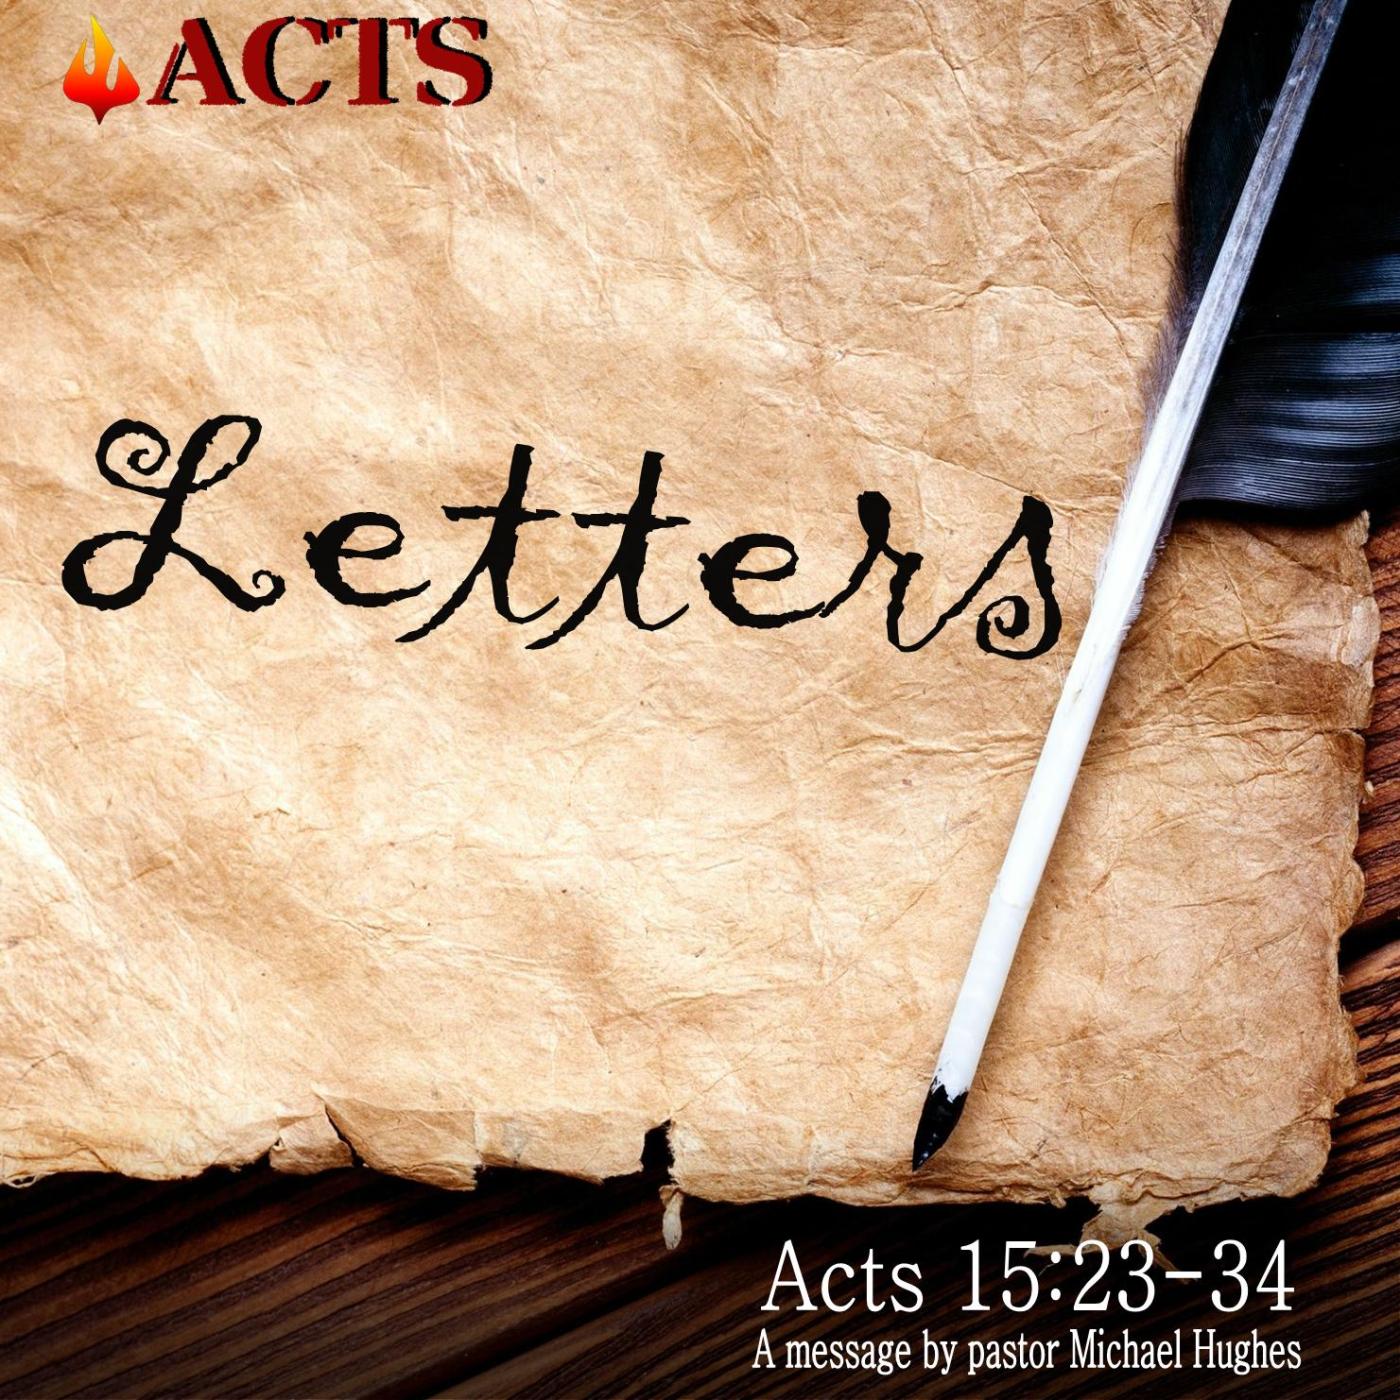 Acts 15:22-34 Letters